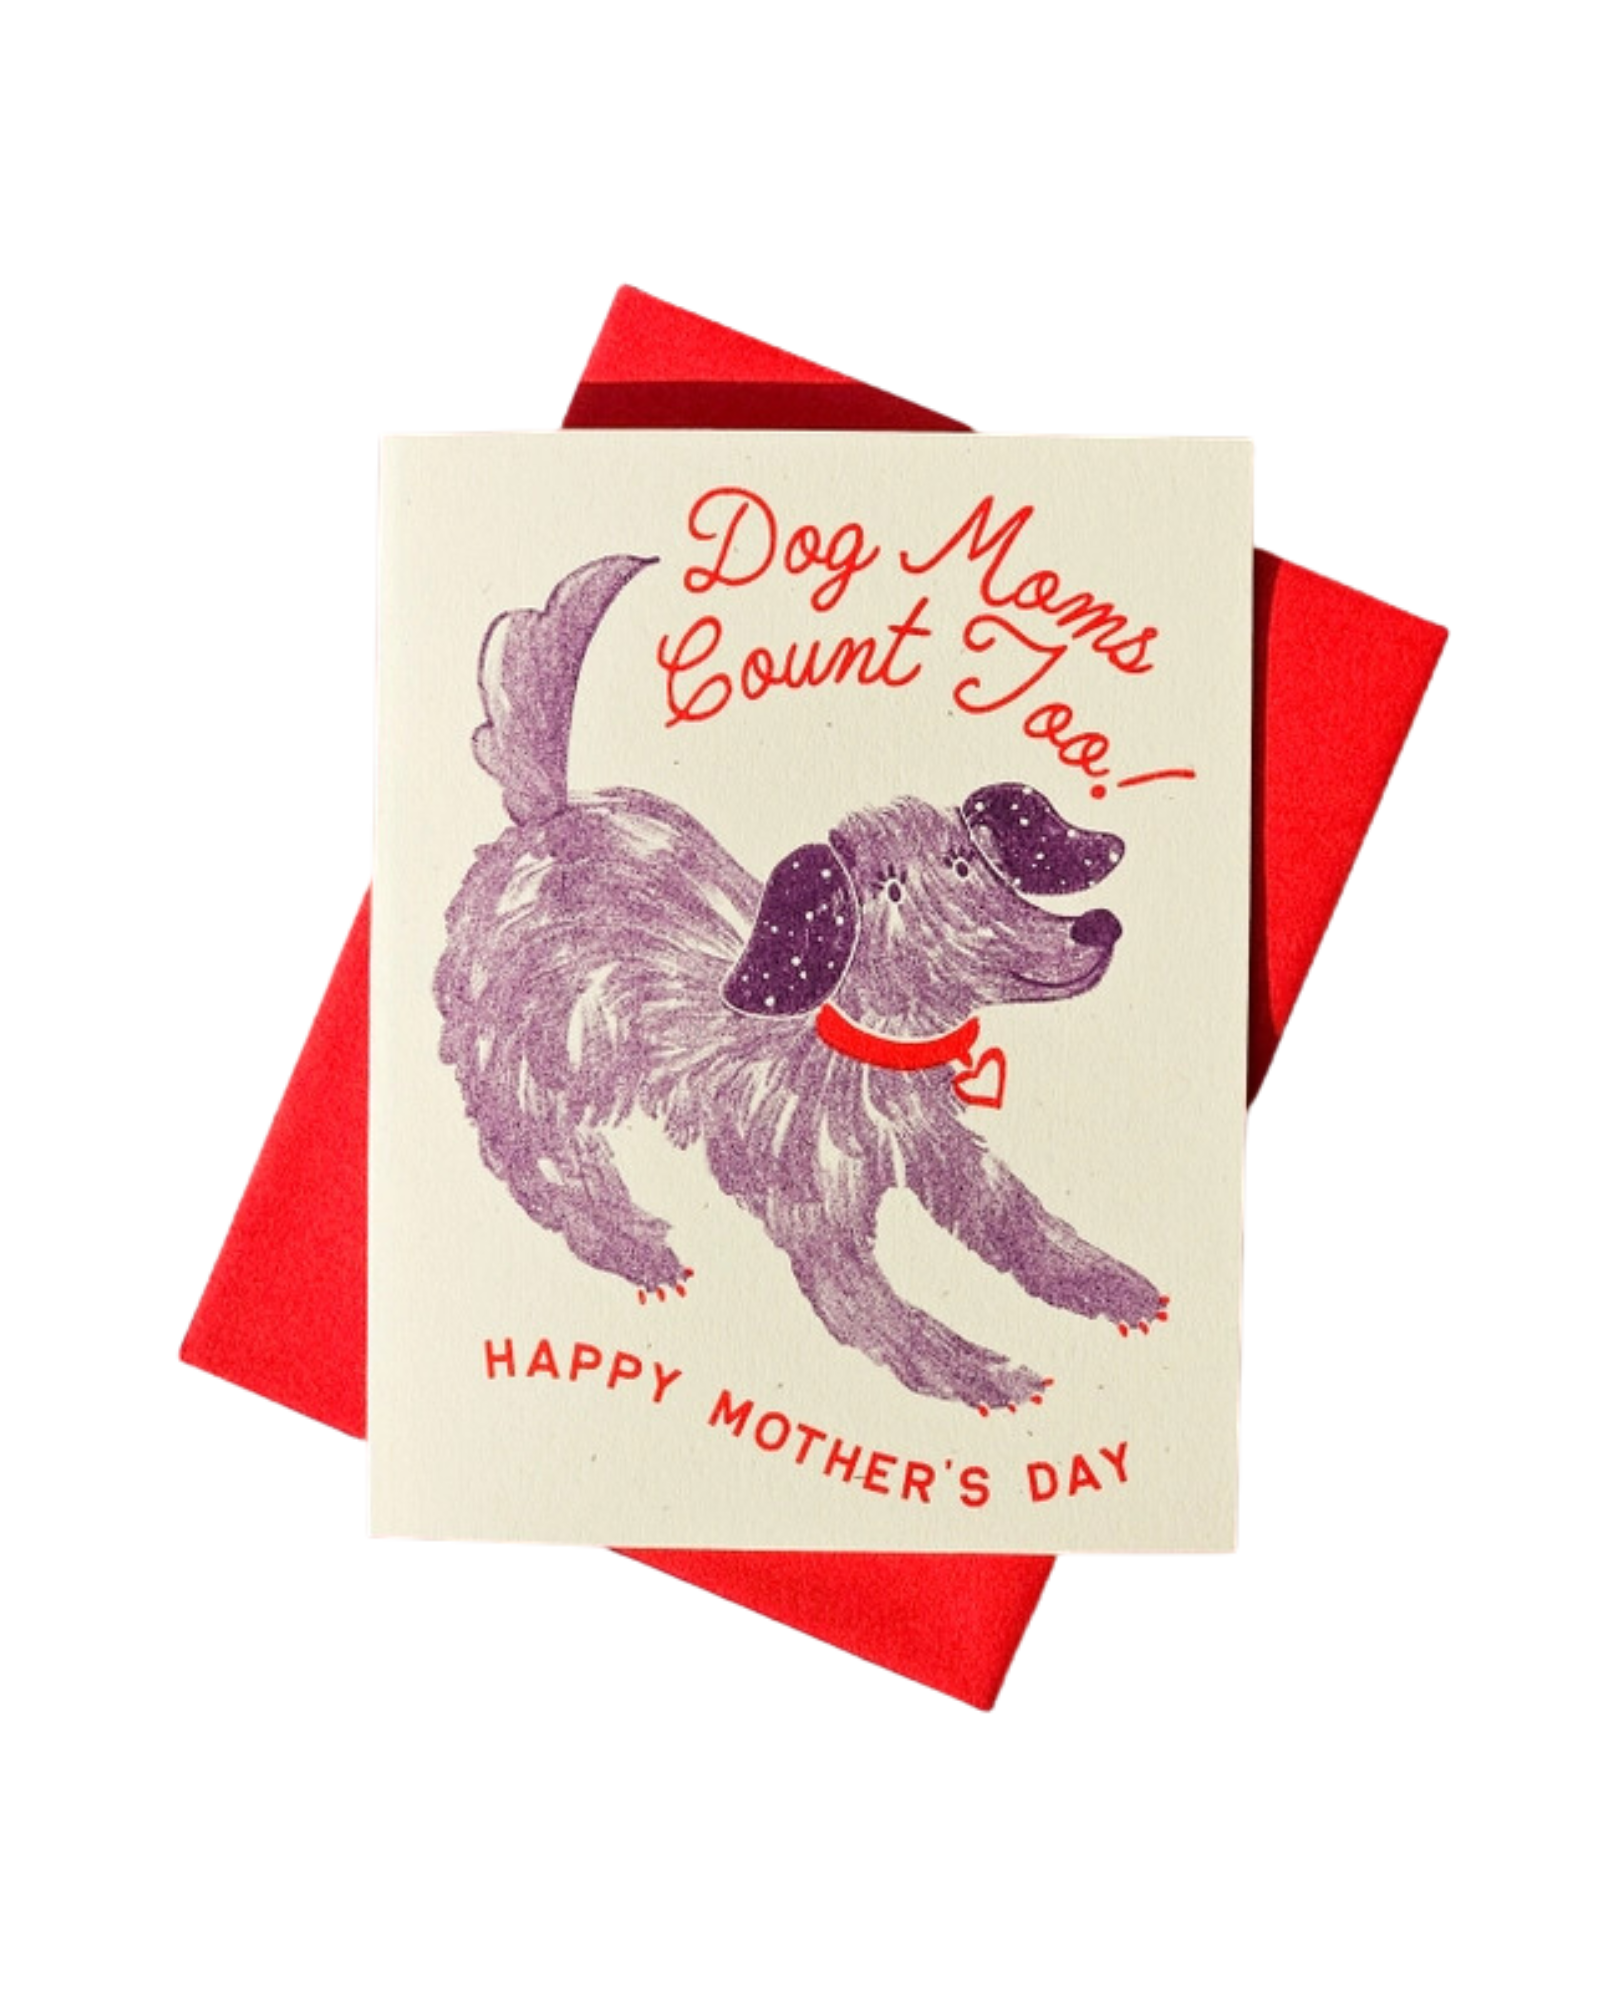 Dog Moms Count Too Mother's Day Card